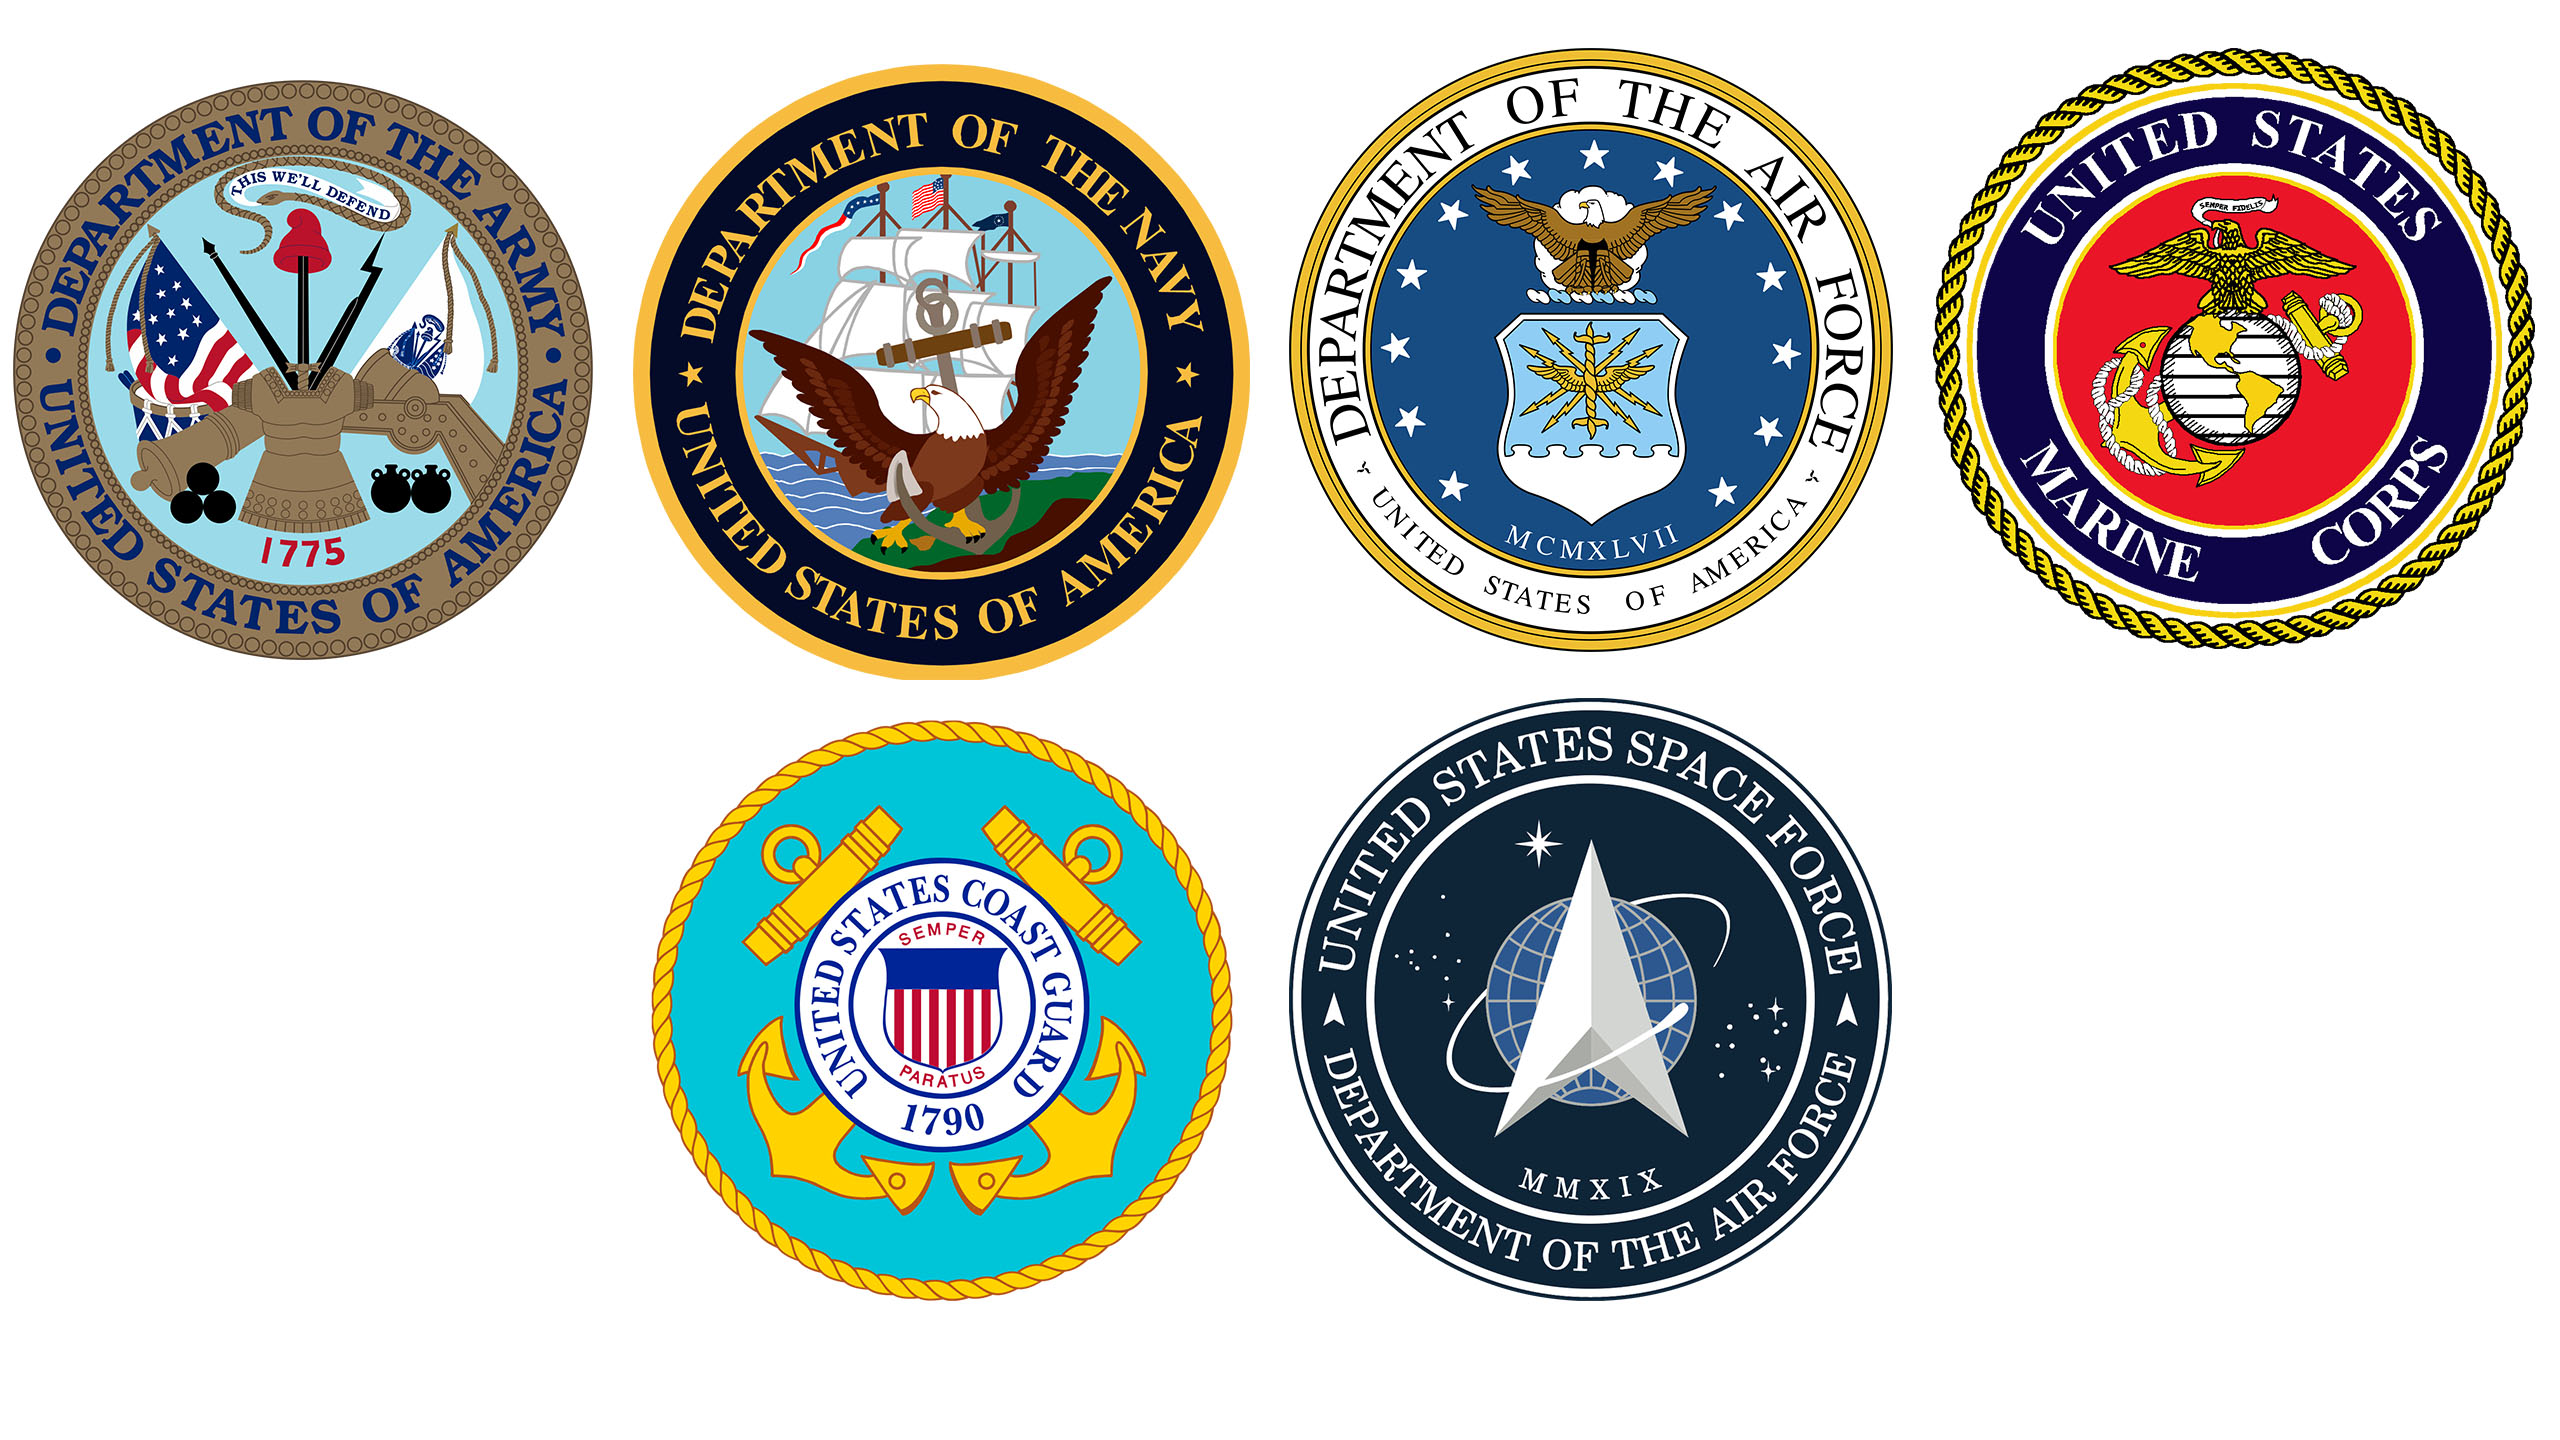 Updated Armed Forces Seals